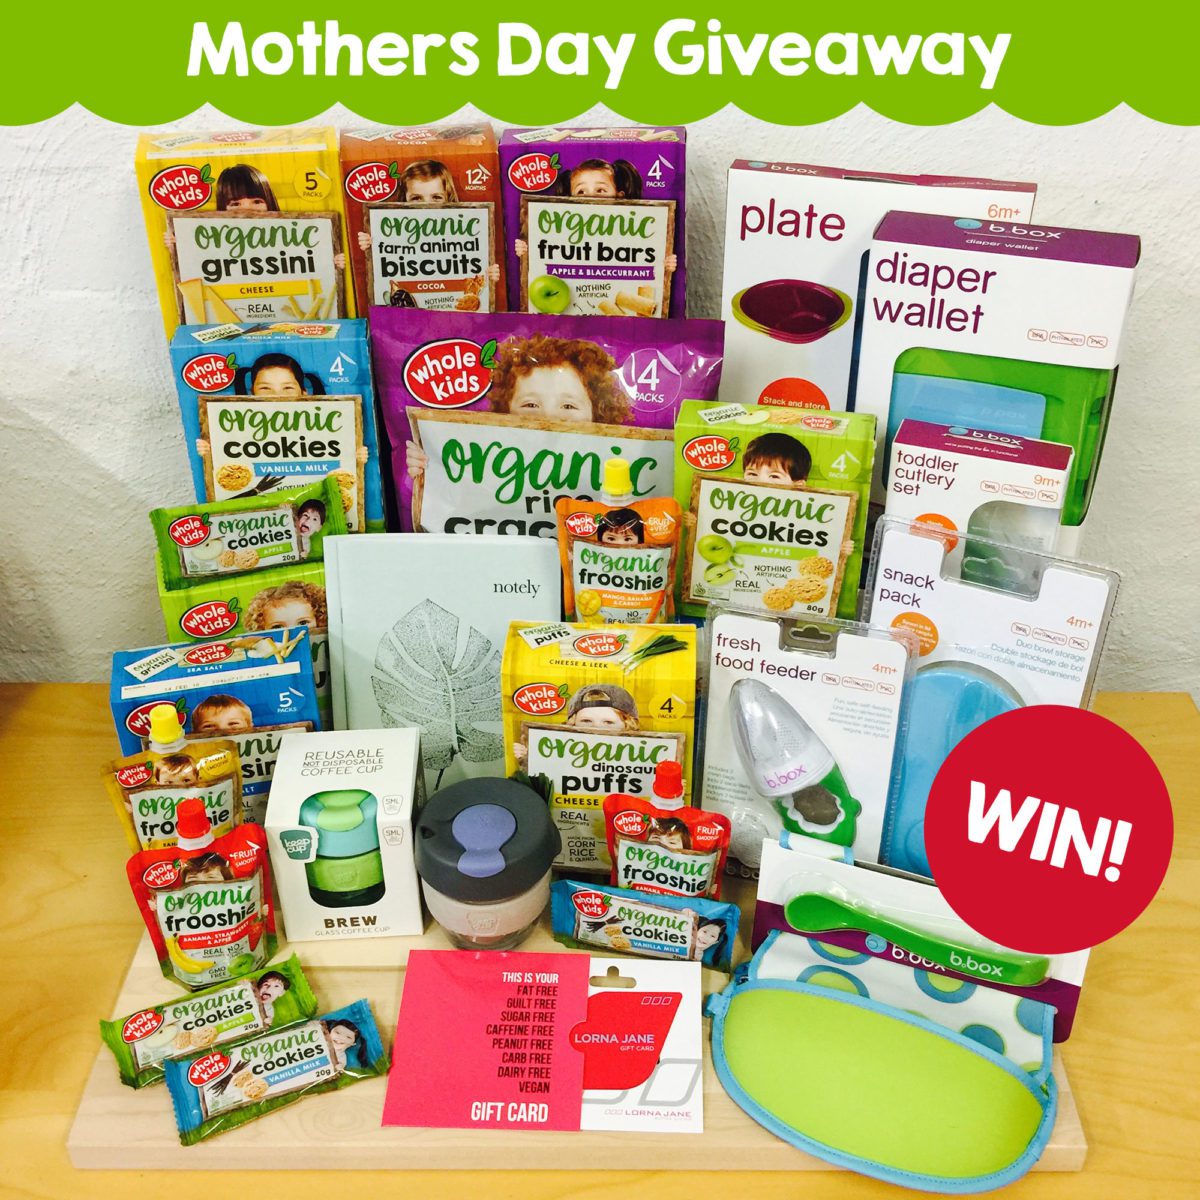 Win Mothers Day